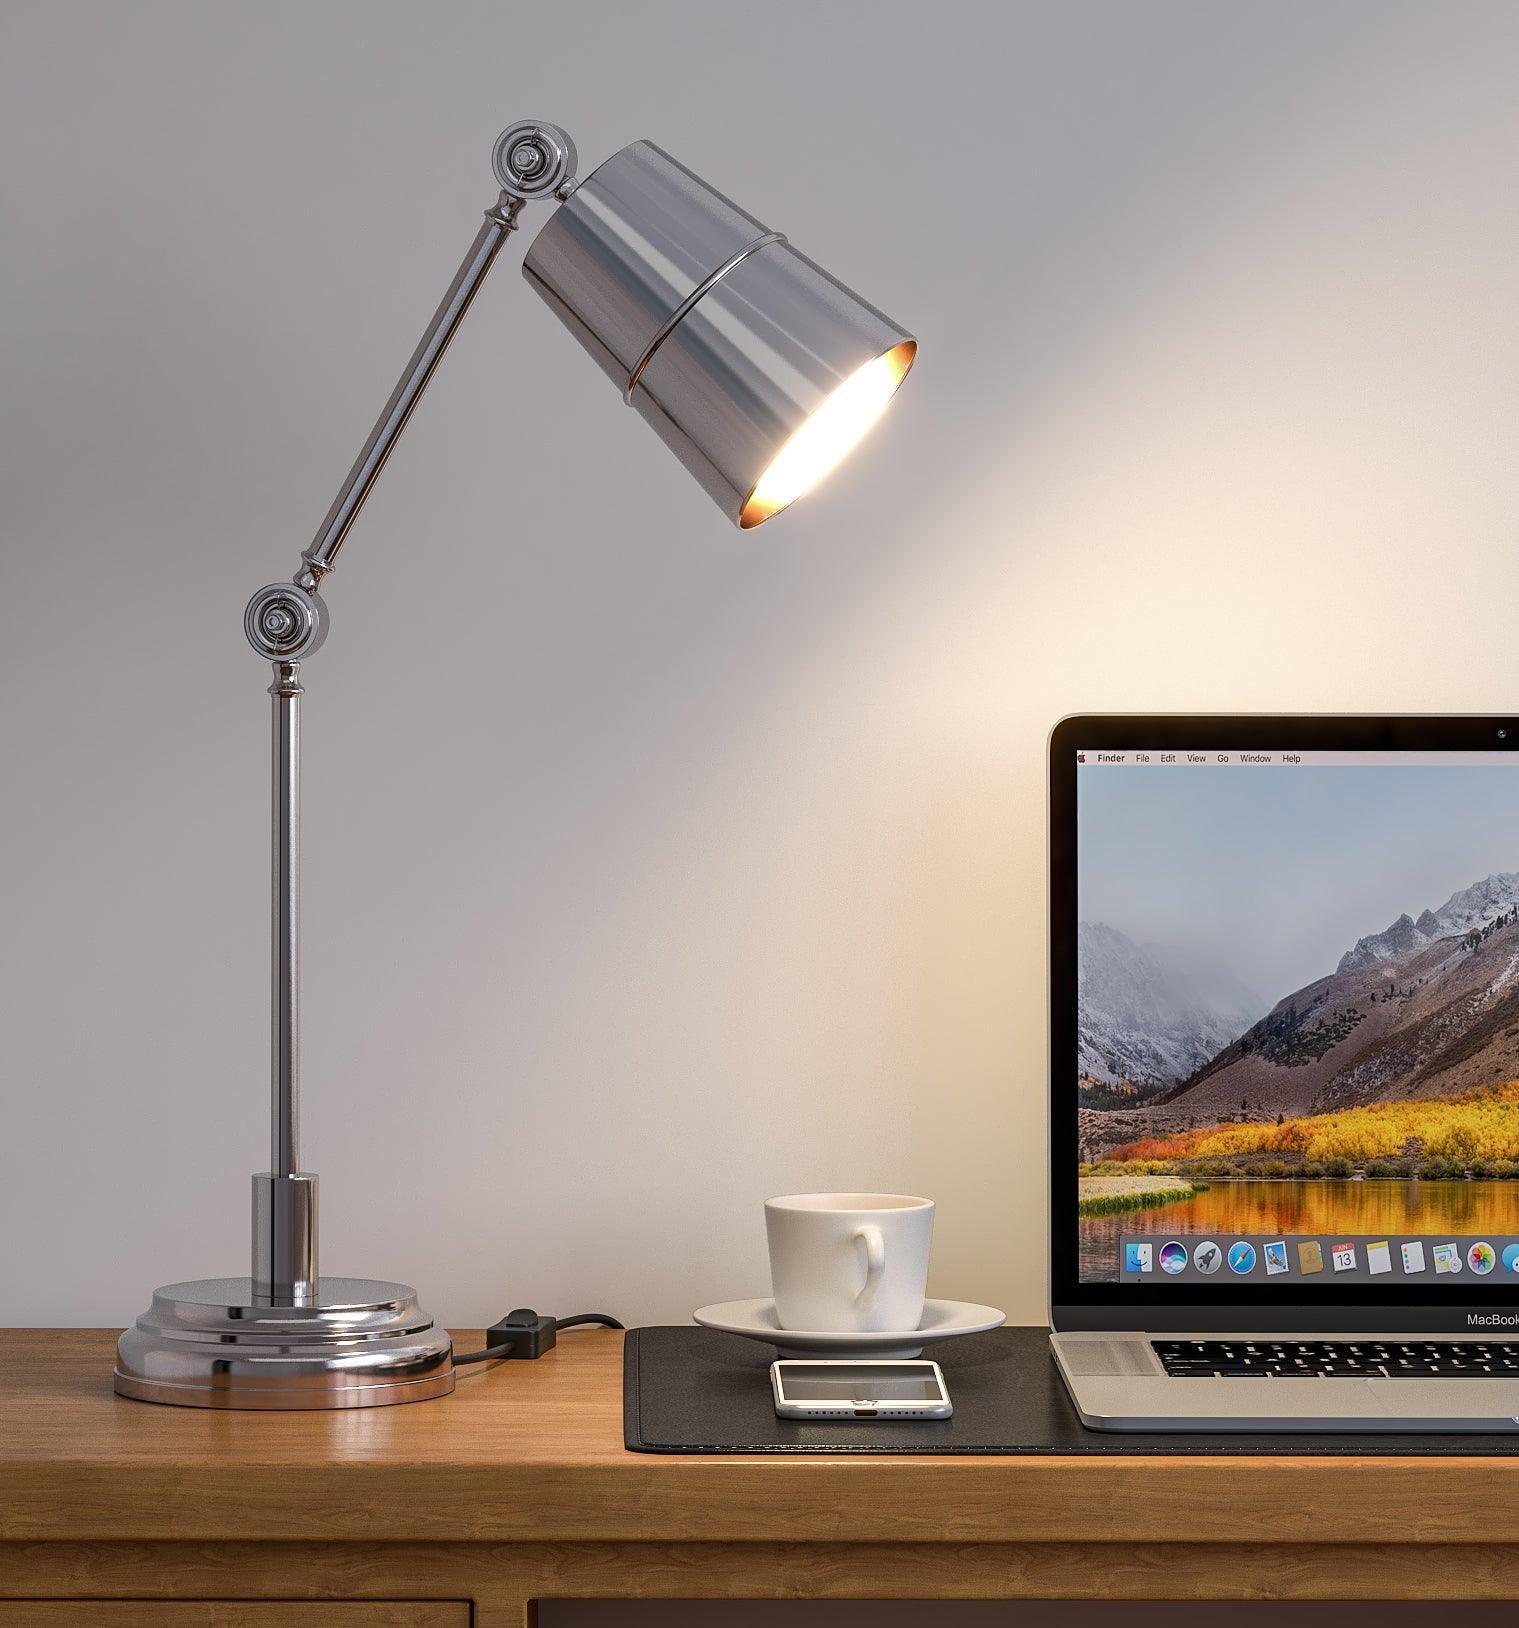 products/buy-table-lamp-adjustable-table-lamp-for-study-office-bedroom-silver-color-by-kp-lamps-store-on-ikiru-online-store-1.jpg